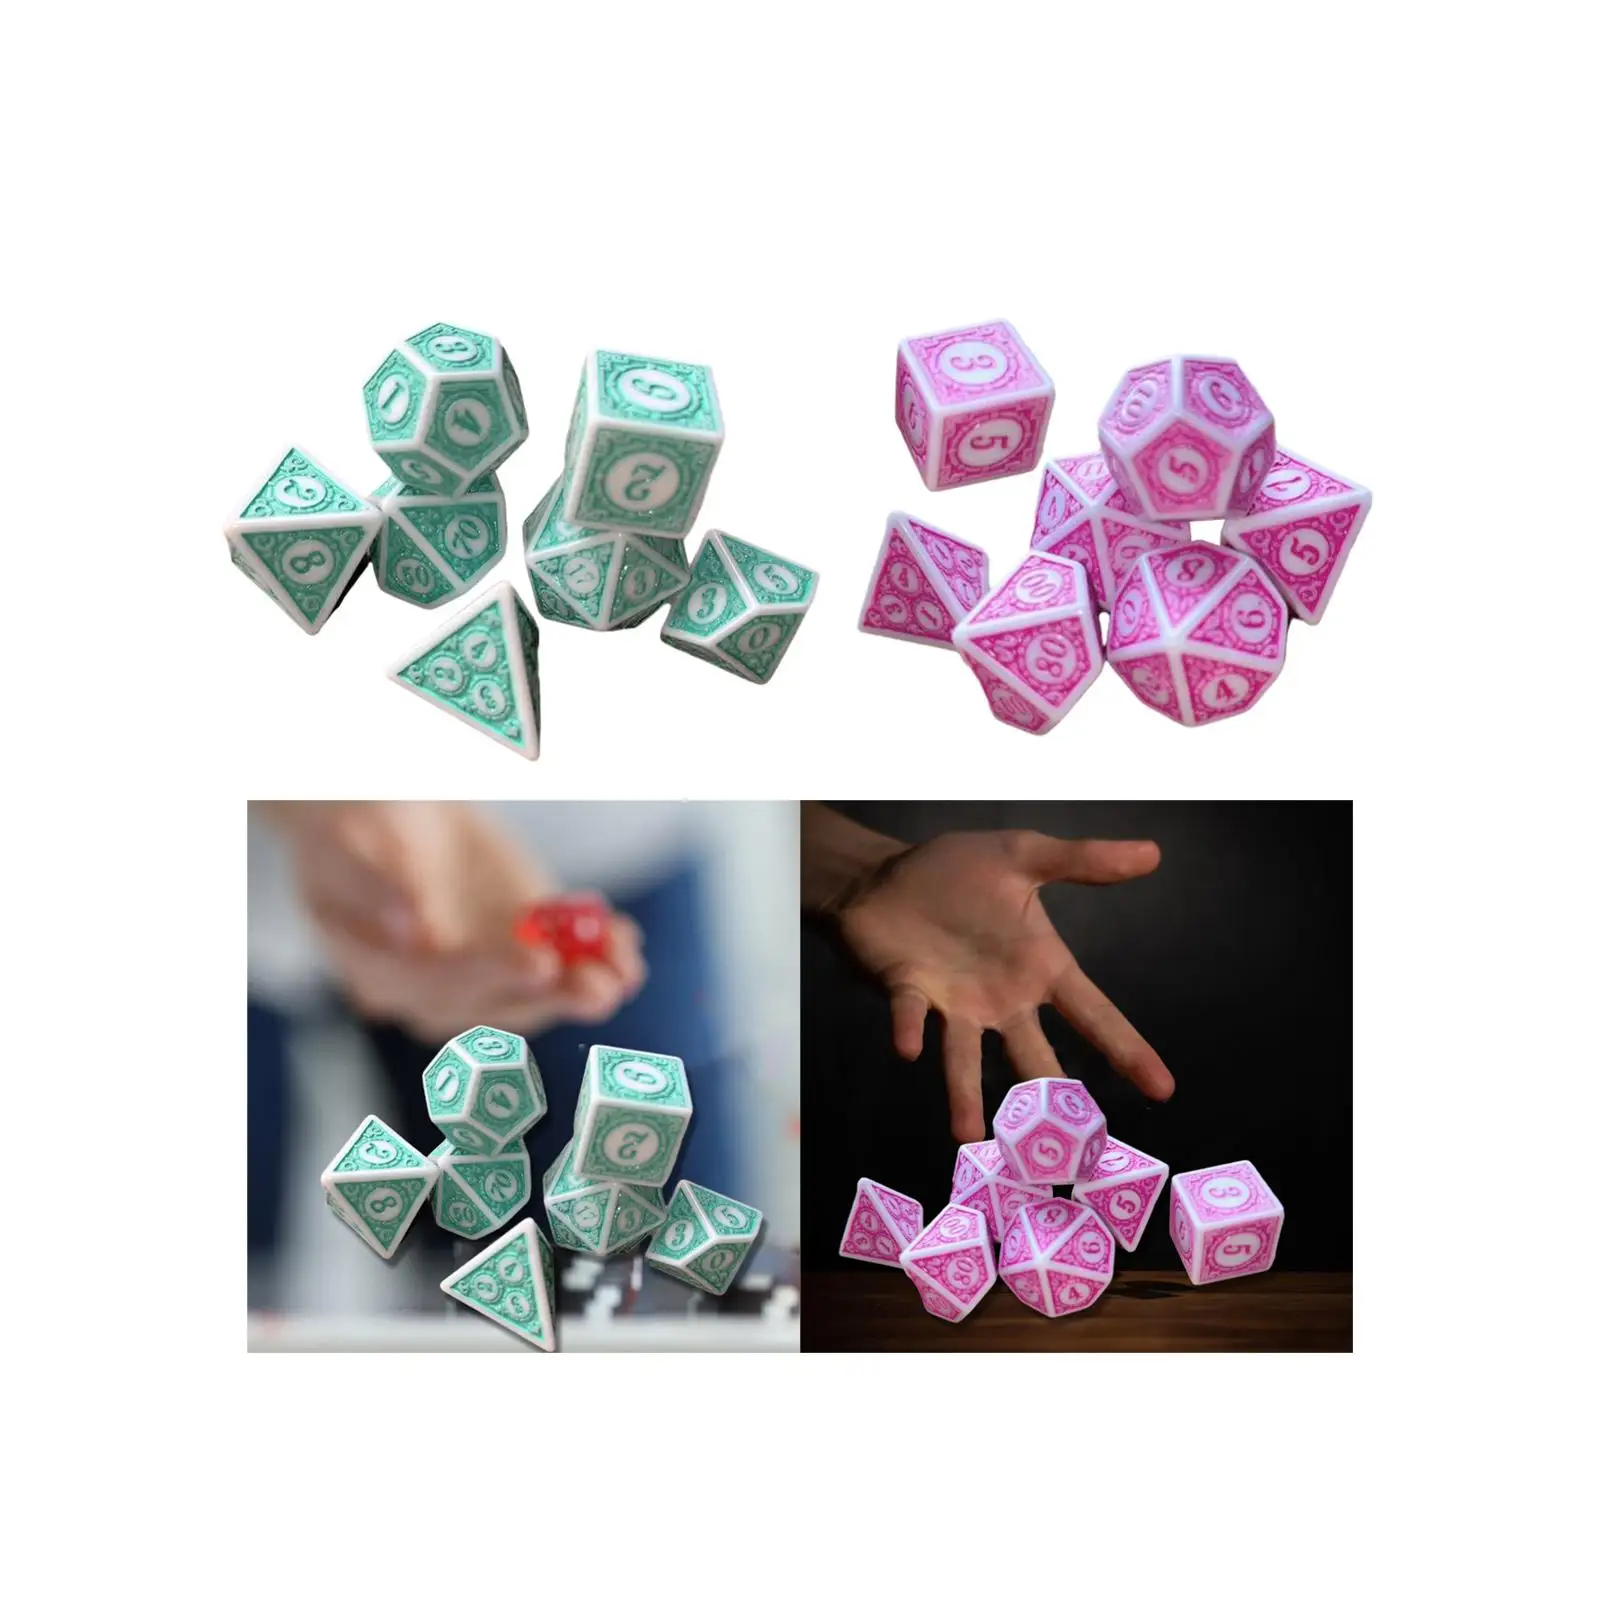 7 Pieces Multi Sided Game Dices Math Teaching Toys Party Favors Entertainment Toys Polyhedral Dices for Party Role Playing Game